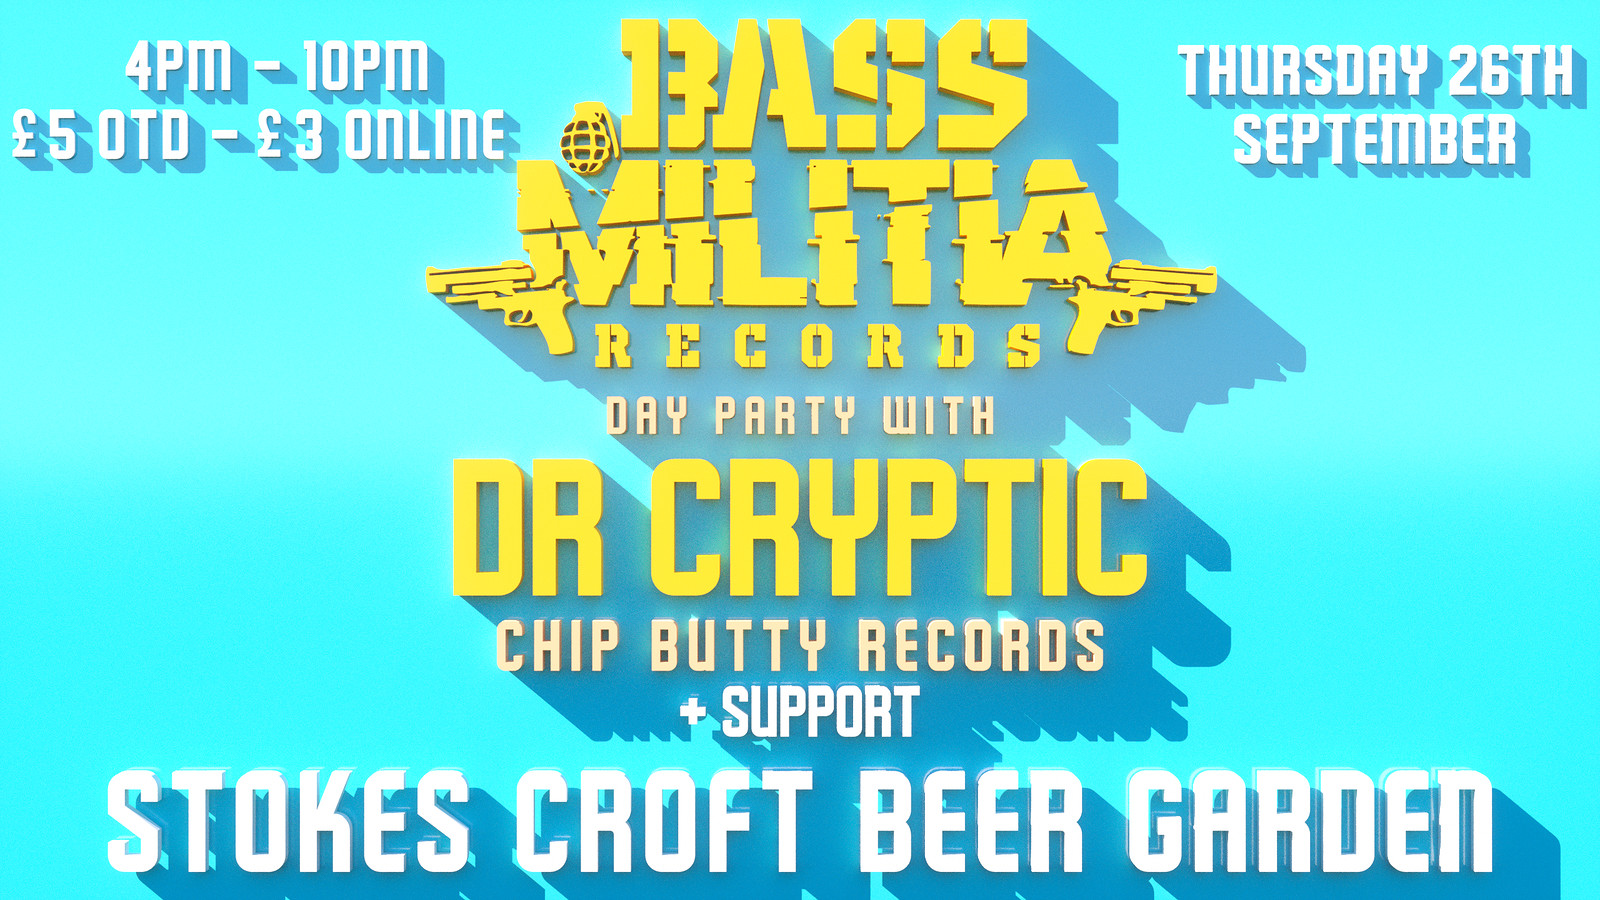 Bass Militia Day Party With Dr Cryptic + KAKE at Stokes Croft Beer Garden